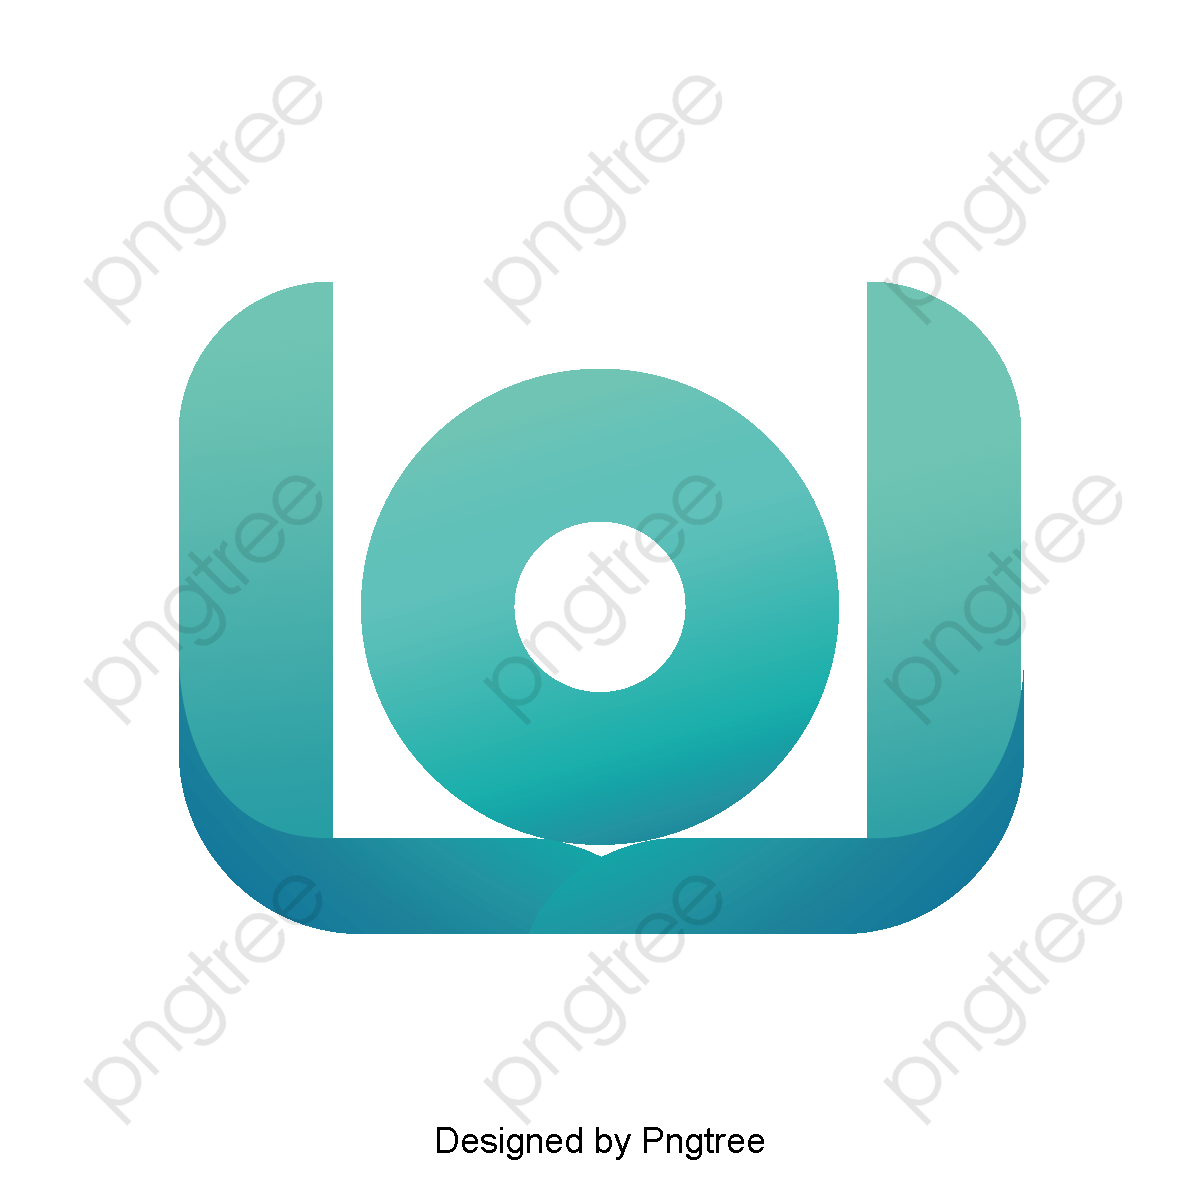 Transparent Camera Logo - Transparent camera logo design PNG Format Image With Size 1200*1200